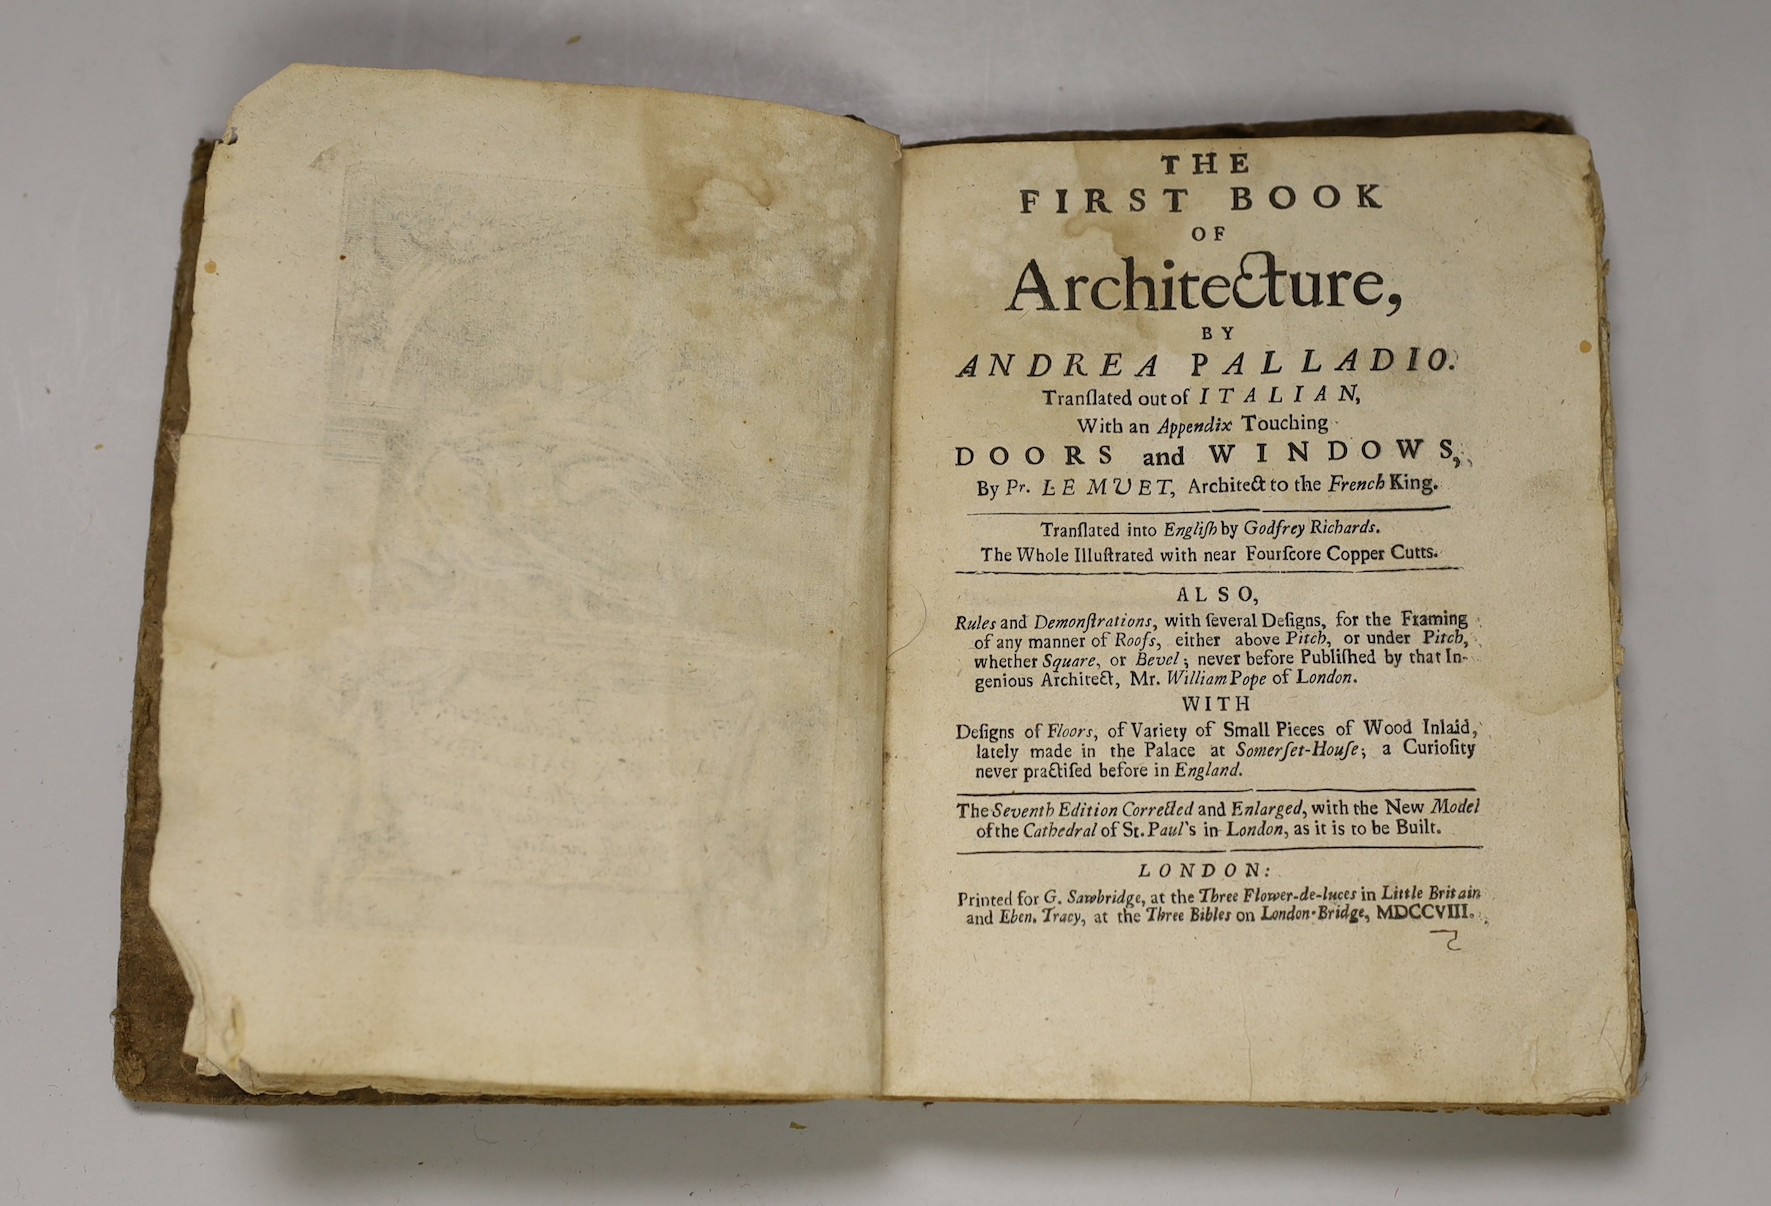 The First Book of Architecture, by Andrea Palladio. Translated out of Italian, with an appendix touching doors and windows, by Pr. Lemuet, Architect to the French king